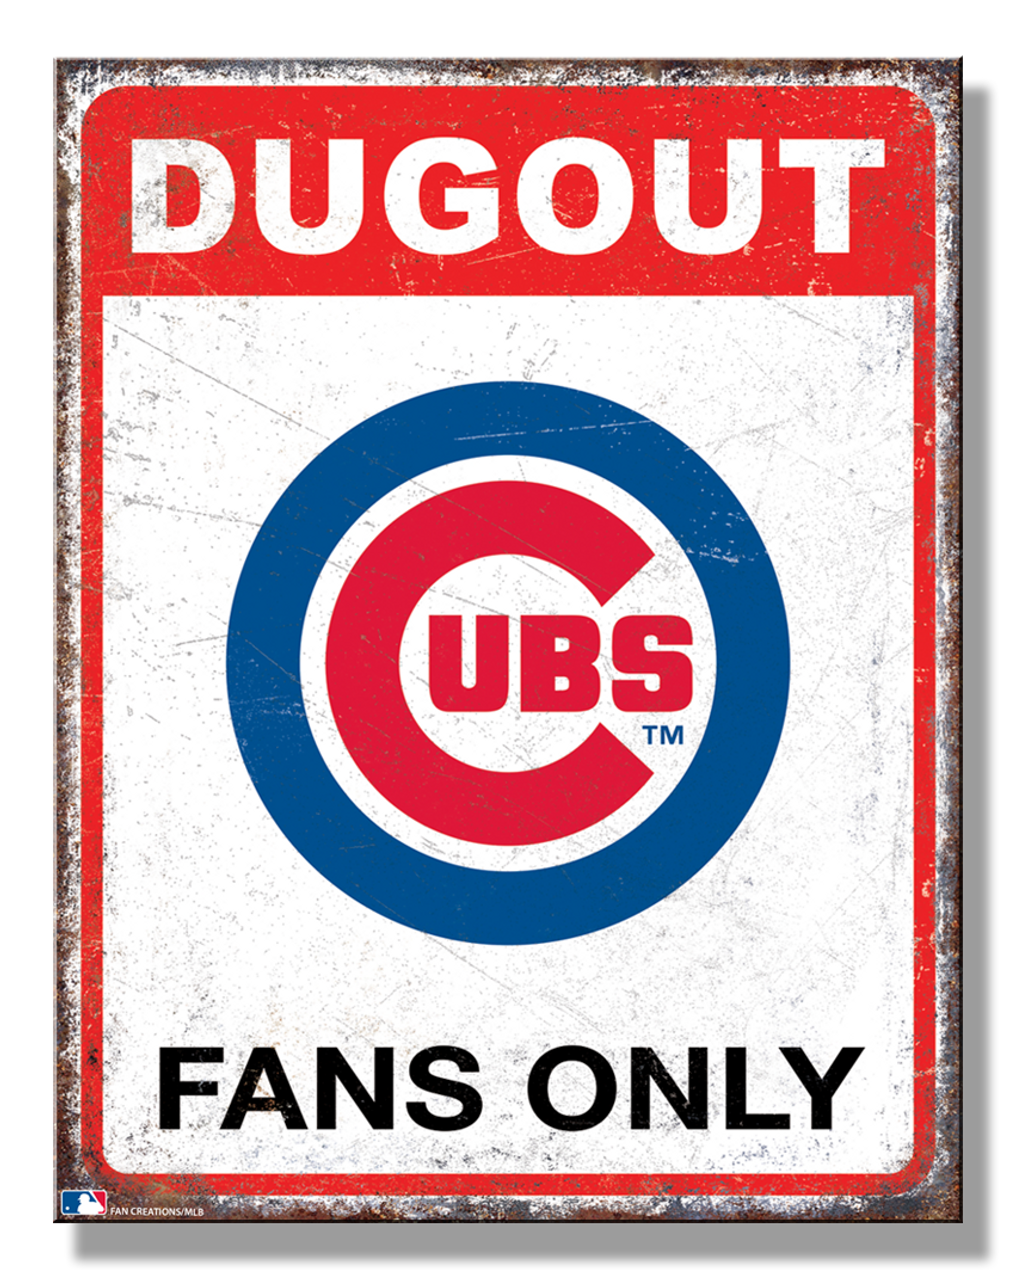 Chicago Cubs Logo and symbol meaning history PNG brand